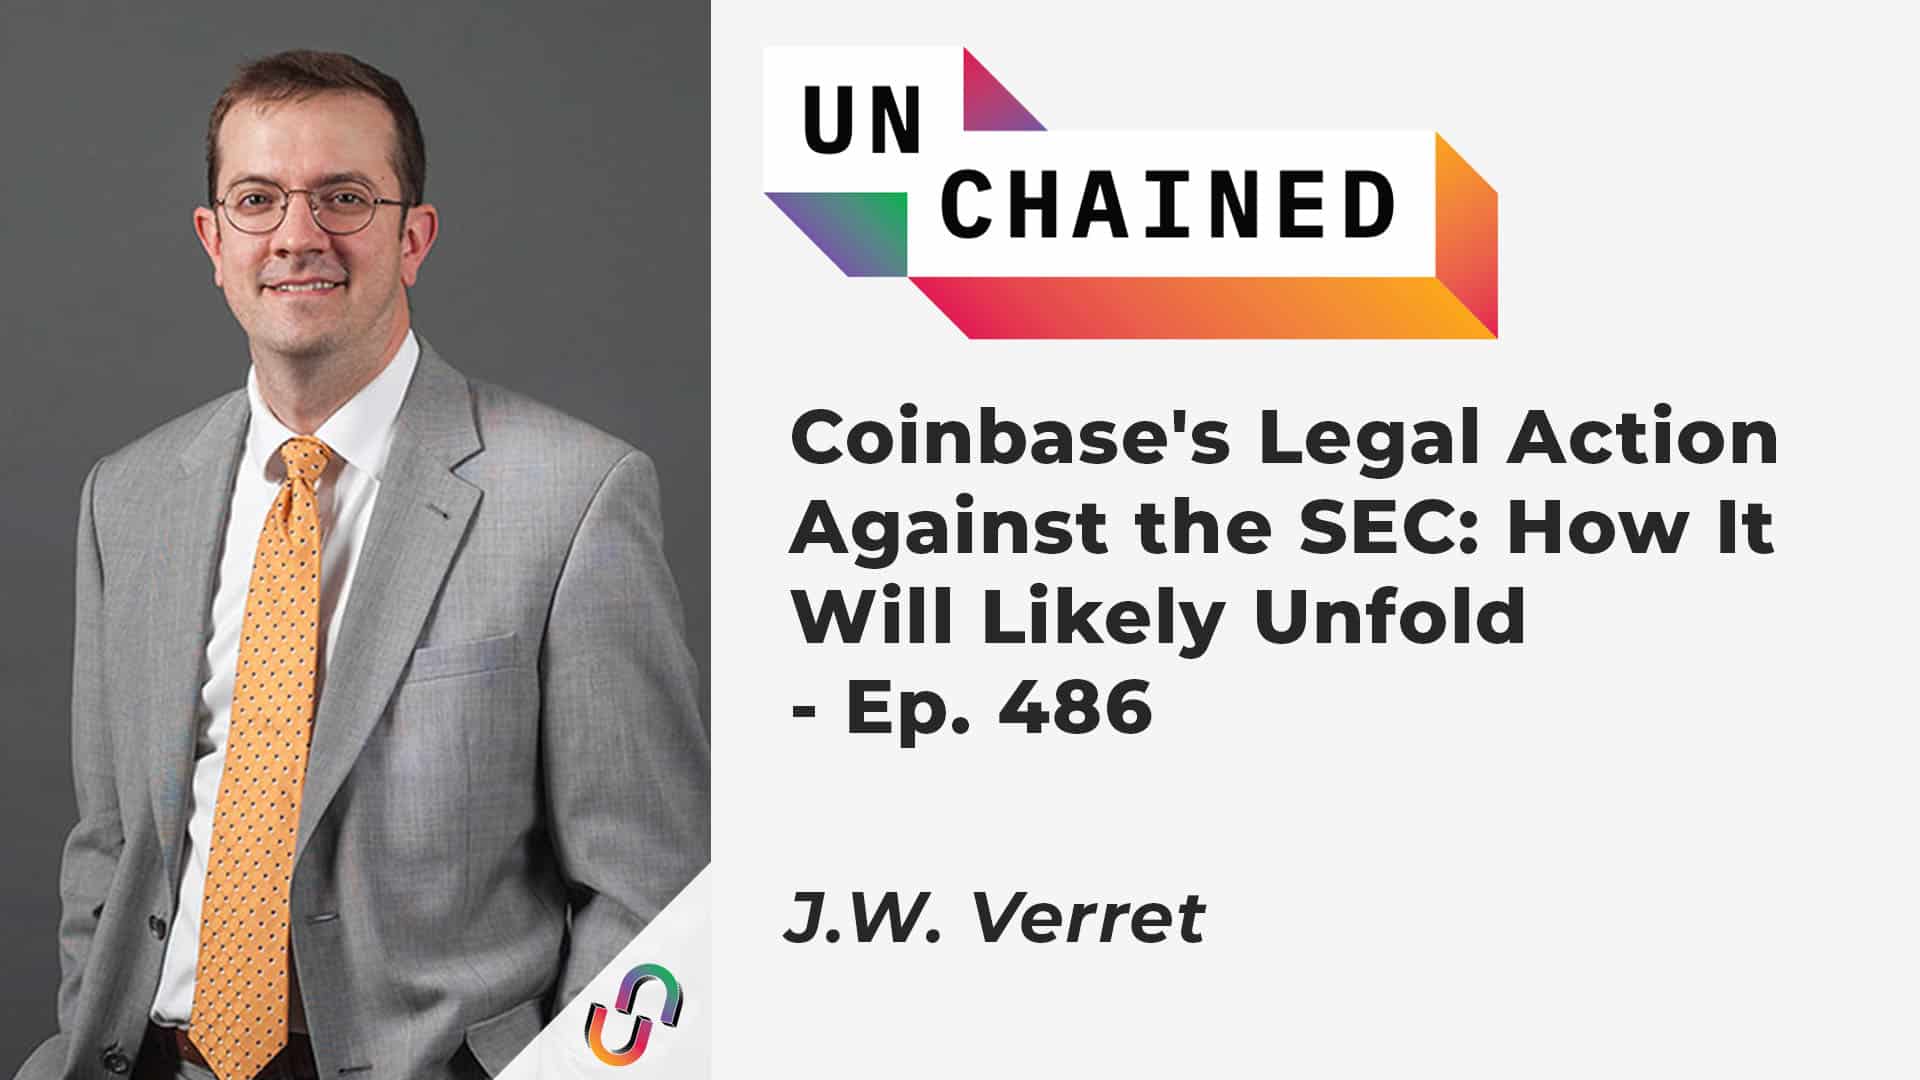 Coinbase's Legal Action Against the SEC: How It Will Likely Unfold - Ep. 486